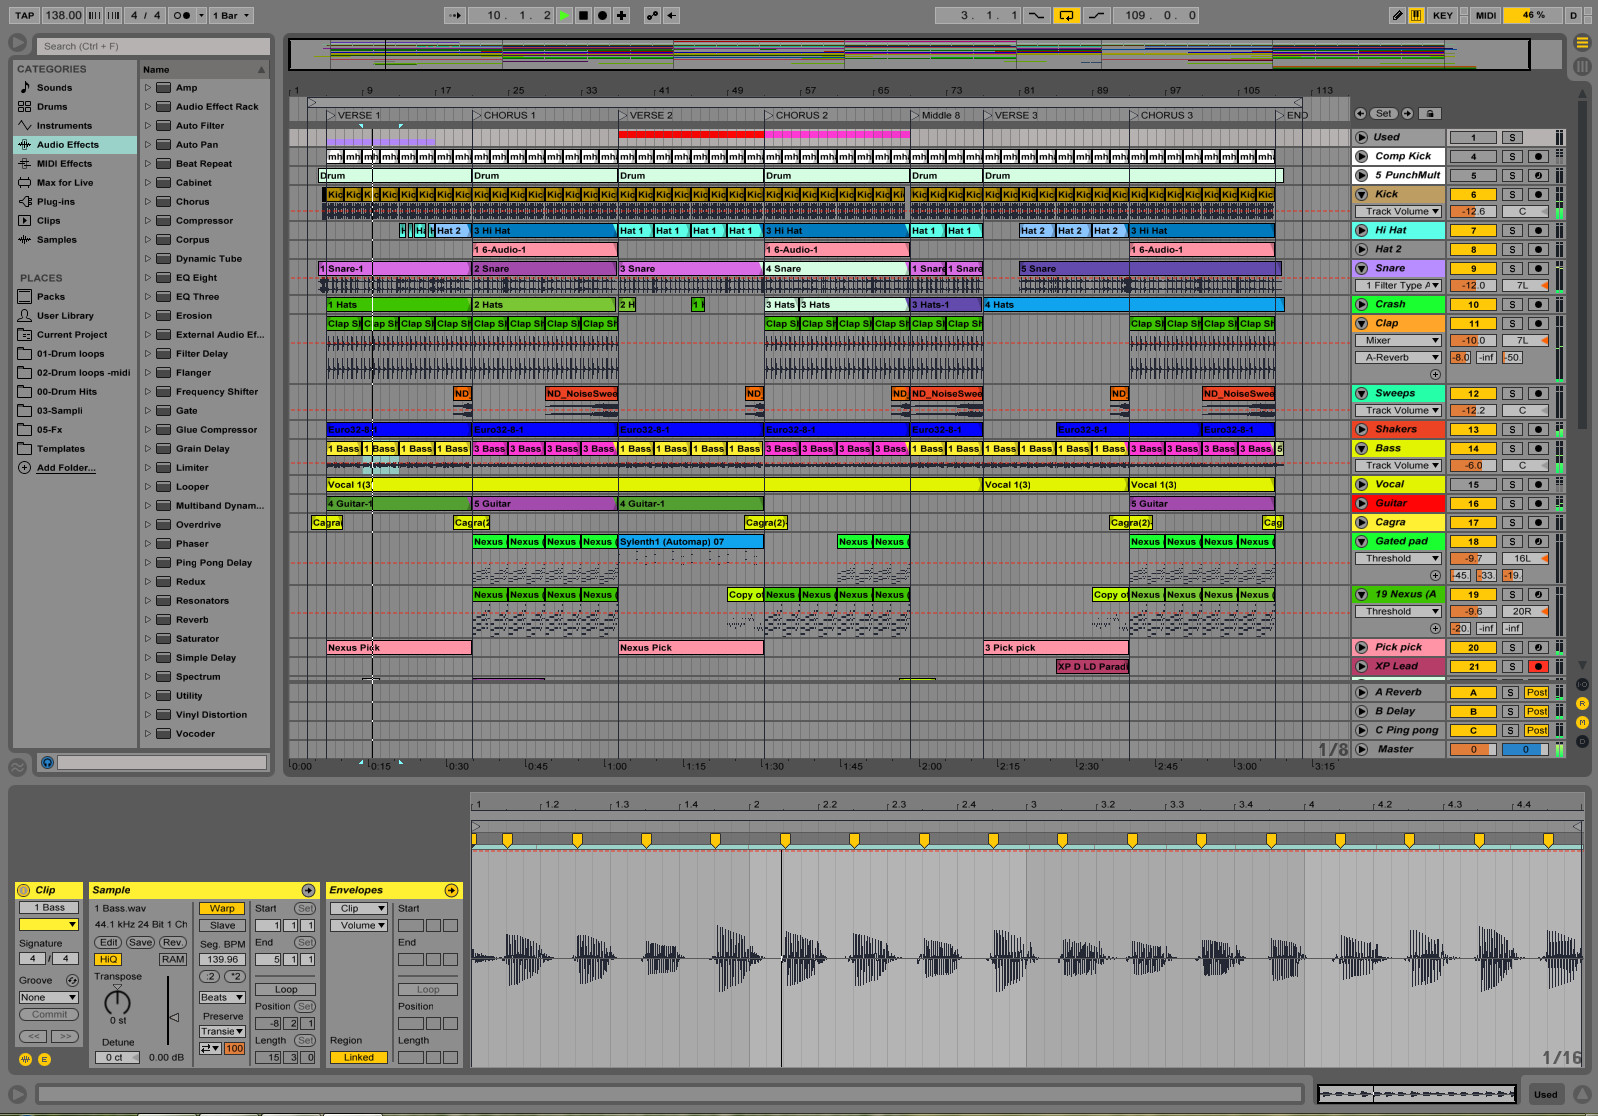 ableton live 7 full version for os x 10.6 free download